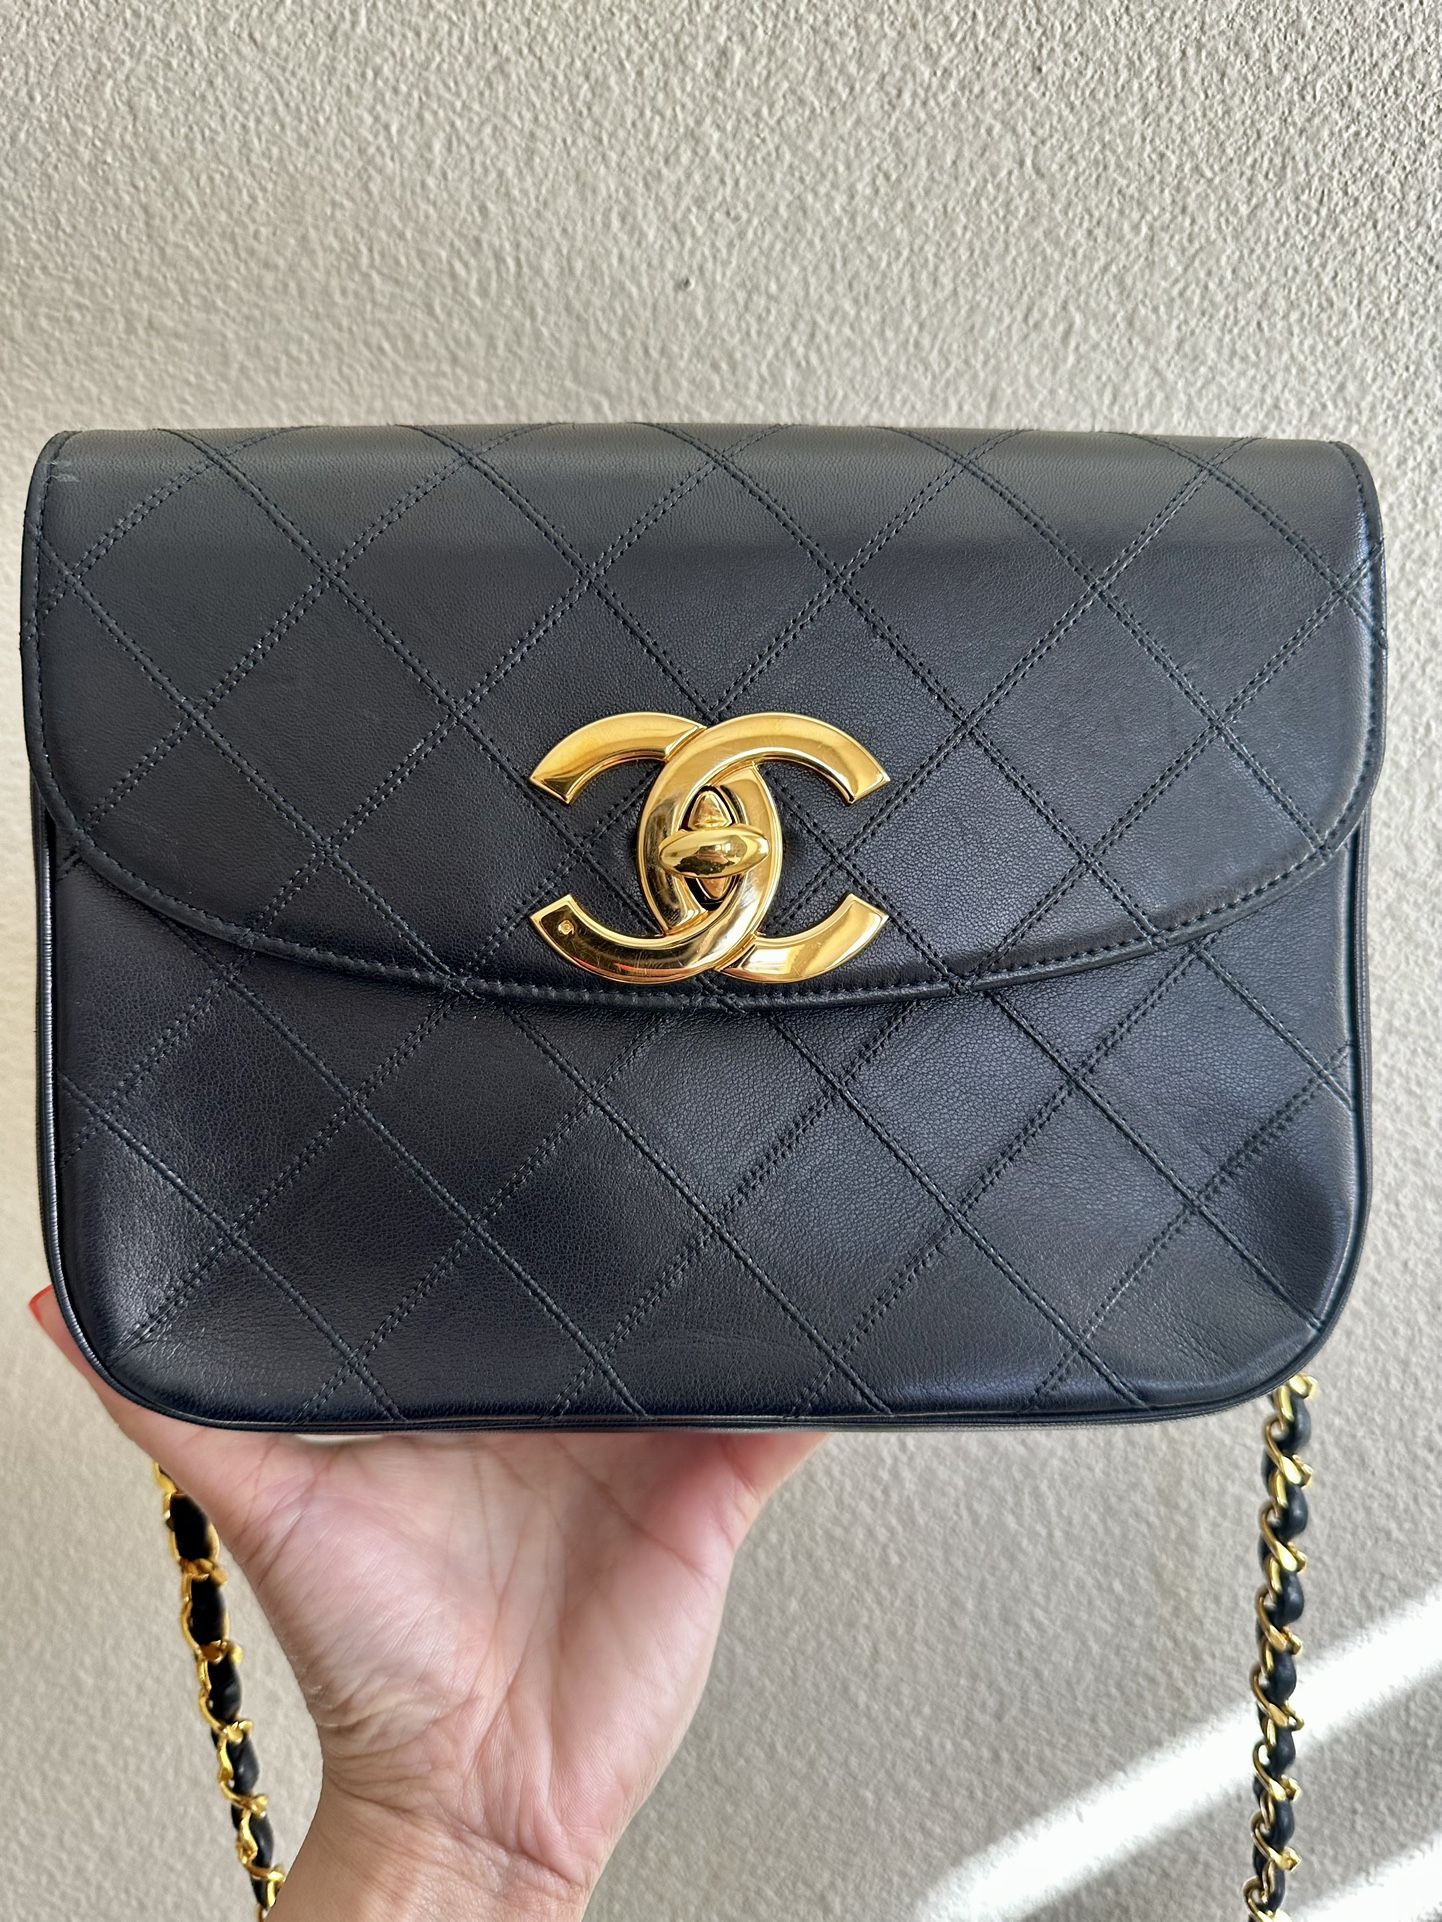 Chanel CC PRIMARY RED BLUE YELLOW QUILTED LEATHER BAG for Sale in